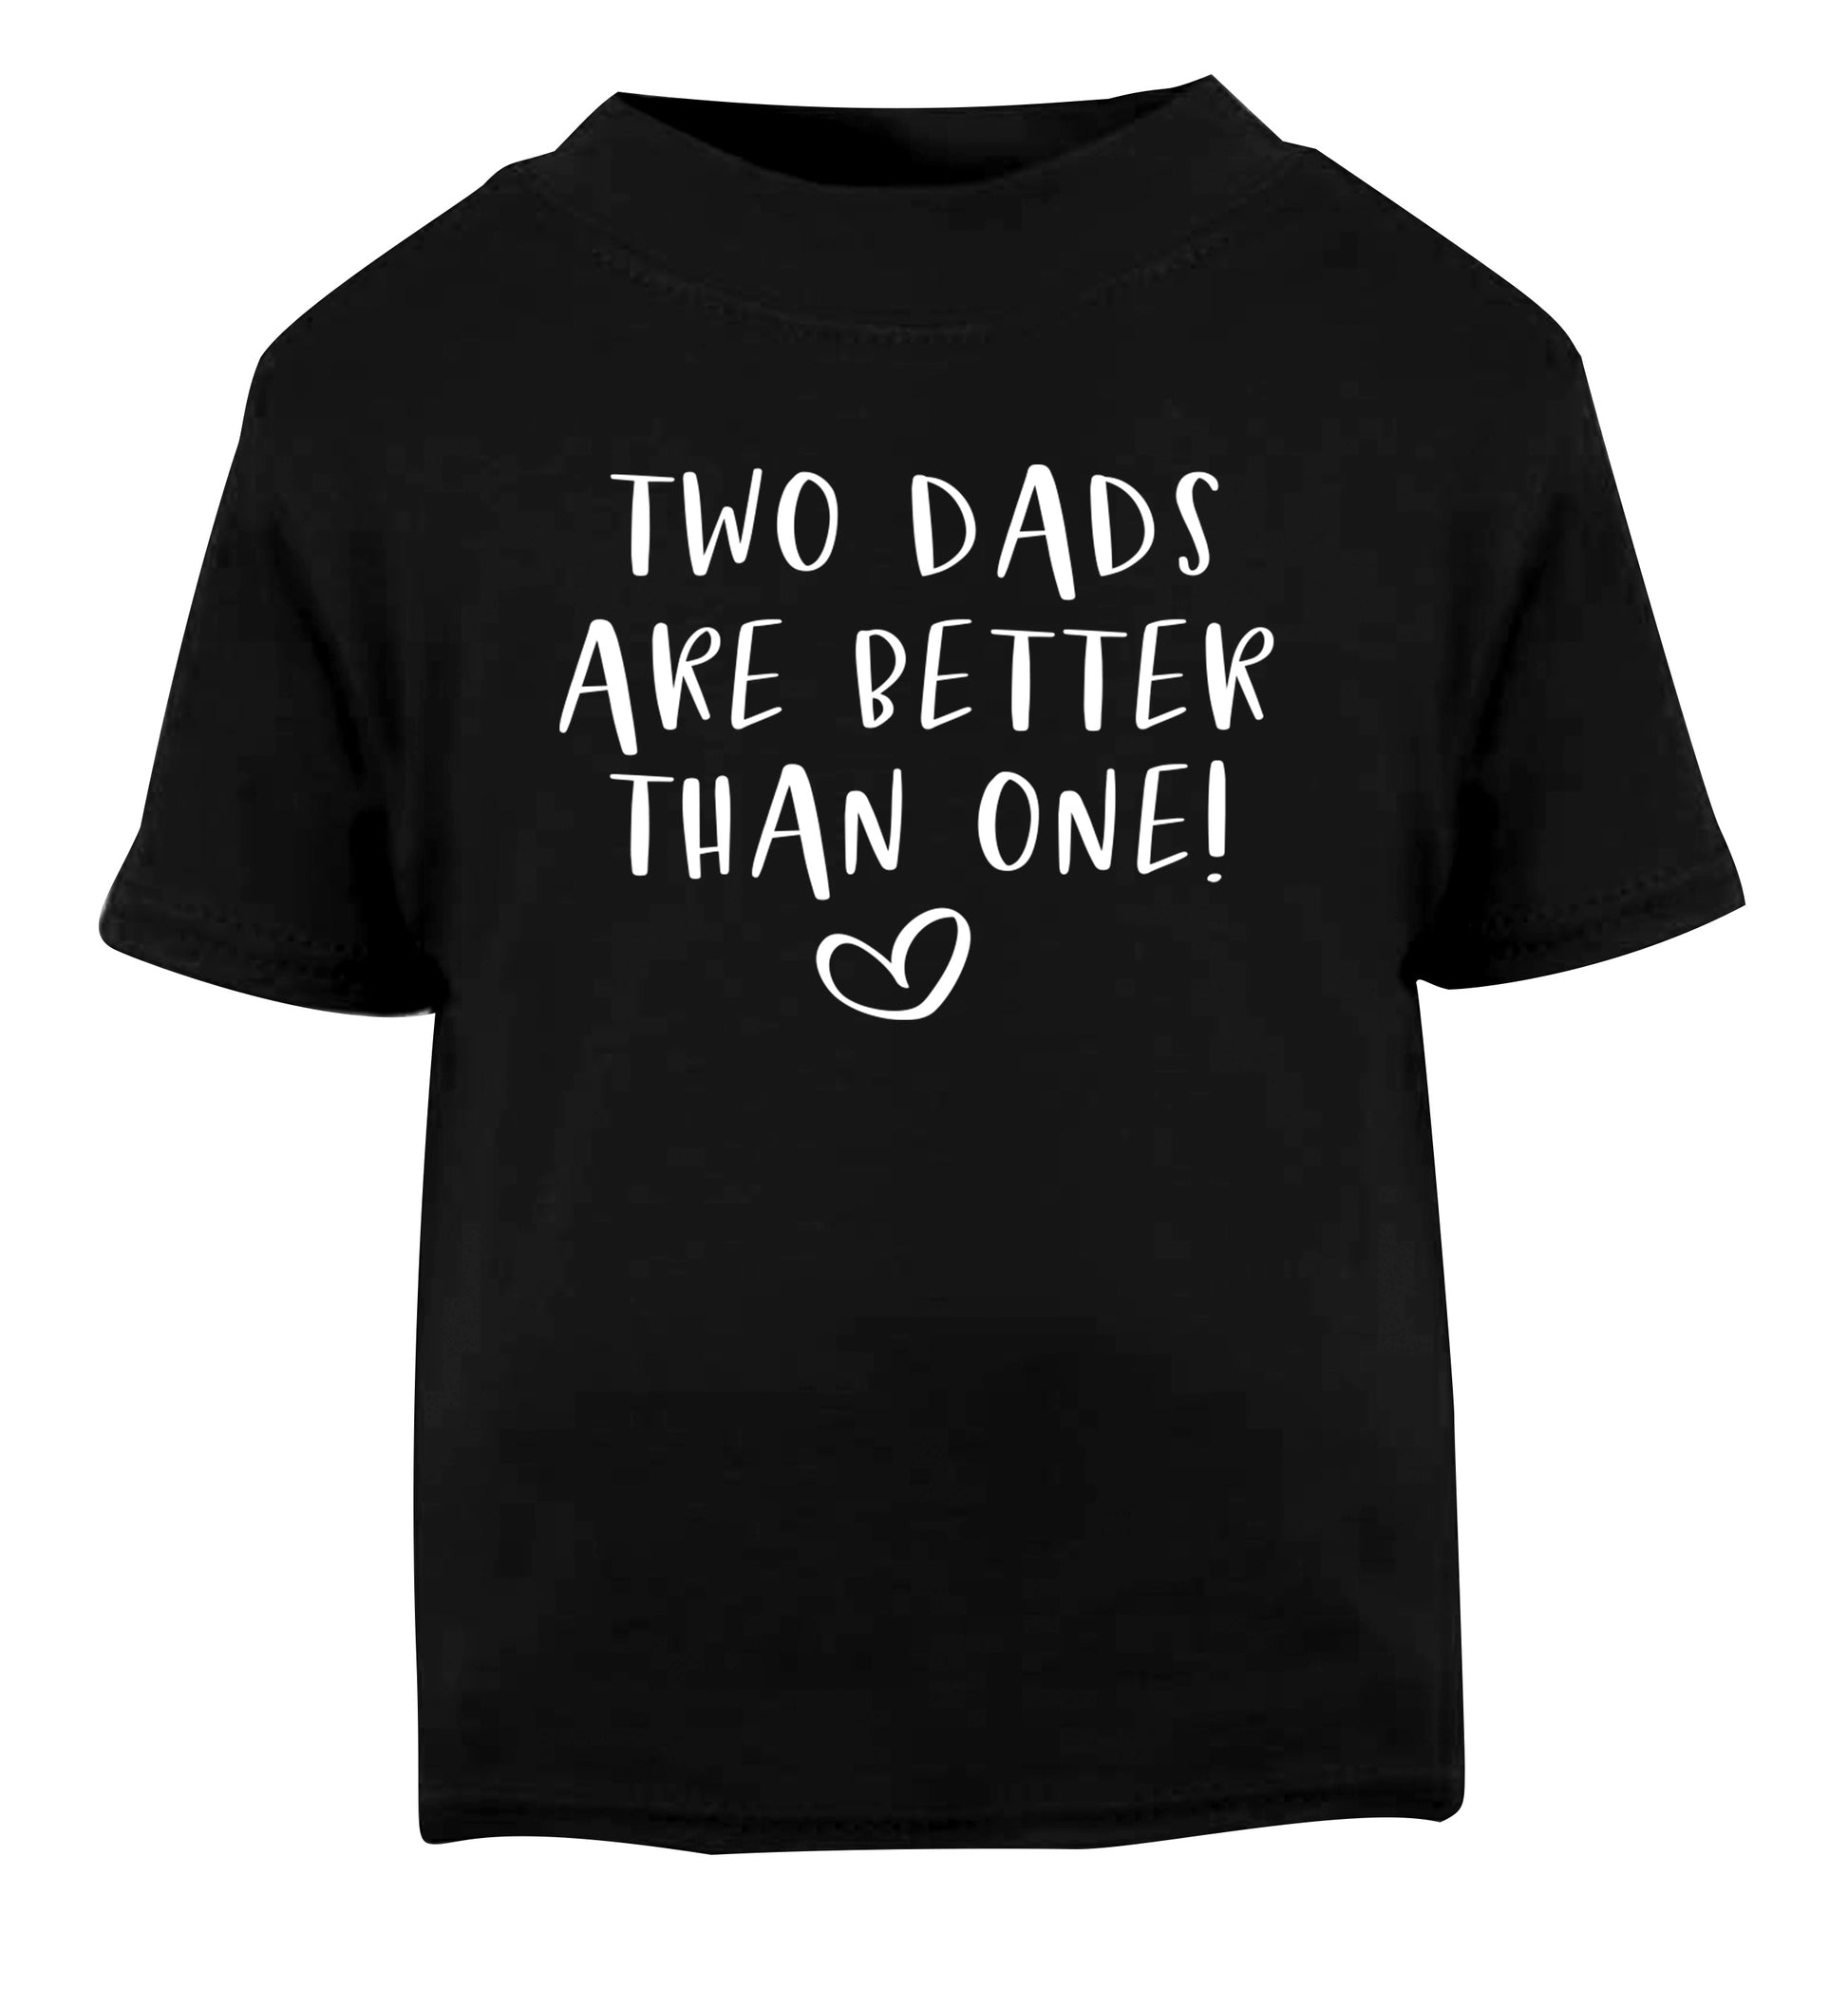 Two dads are better than one Black Baby Toddler Tshirt 2 years